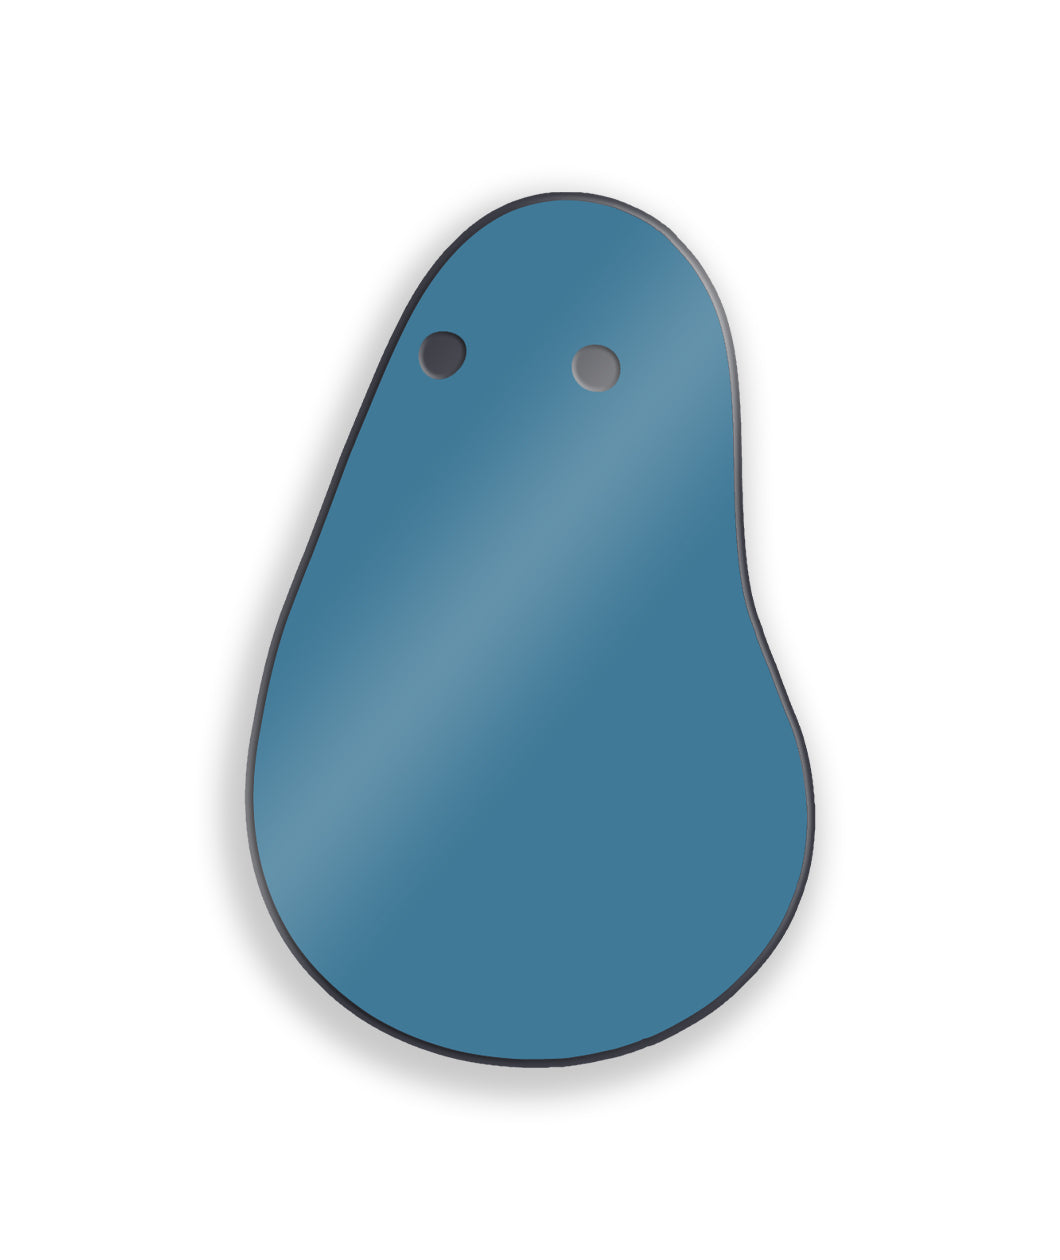 An ovular blue pin with a black outline and a wide base and thinner top. Two black circles act as the eyes - from Primer